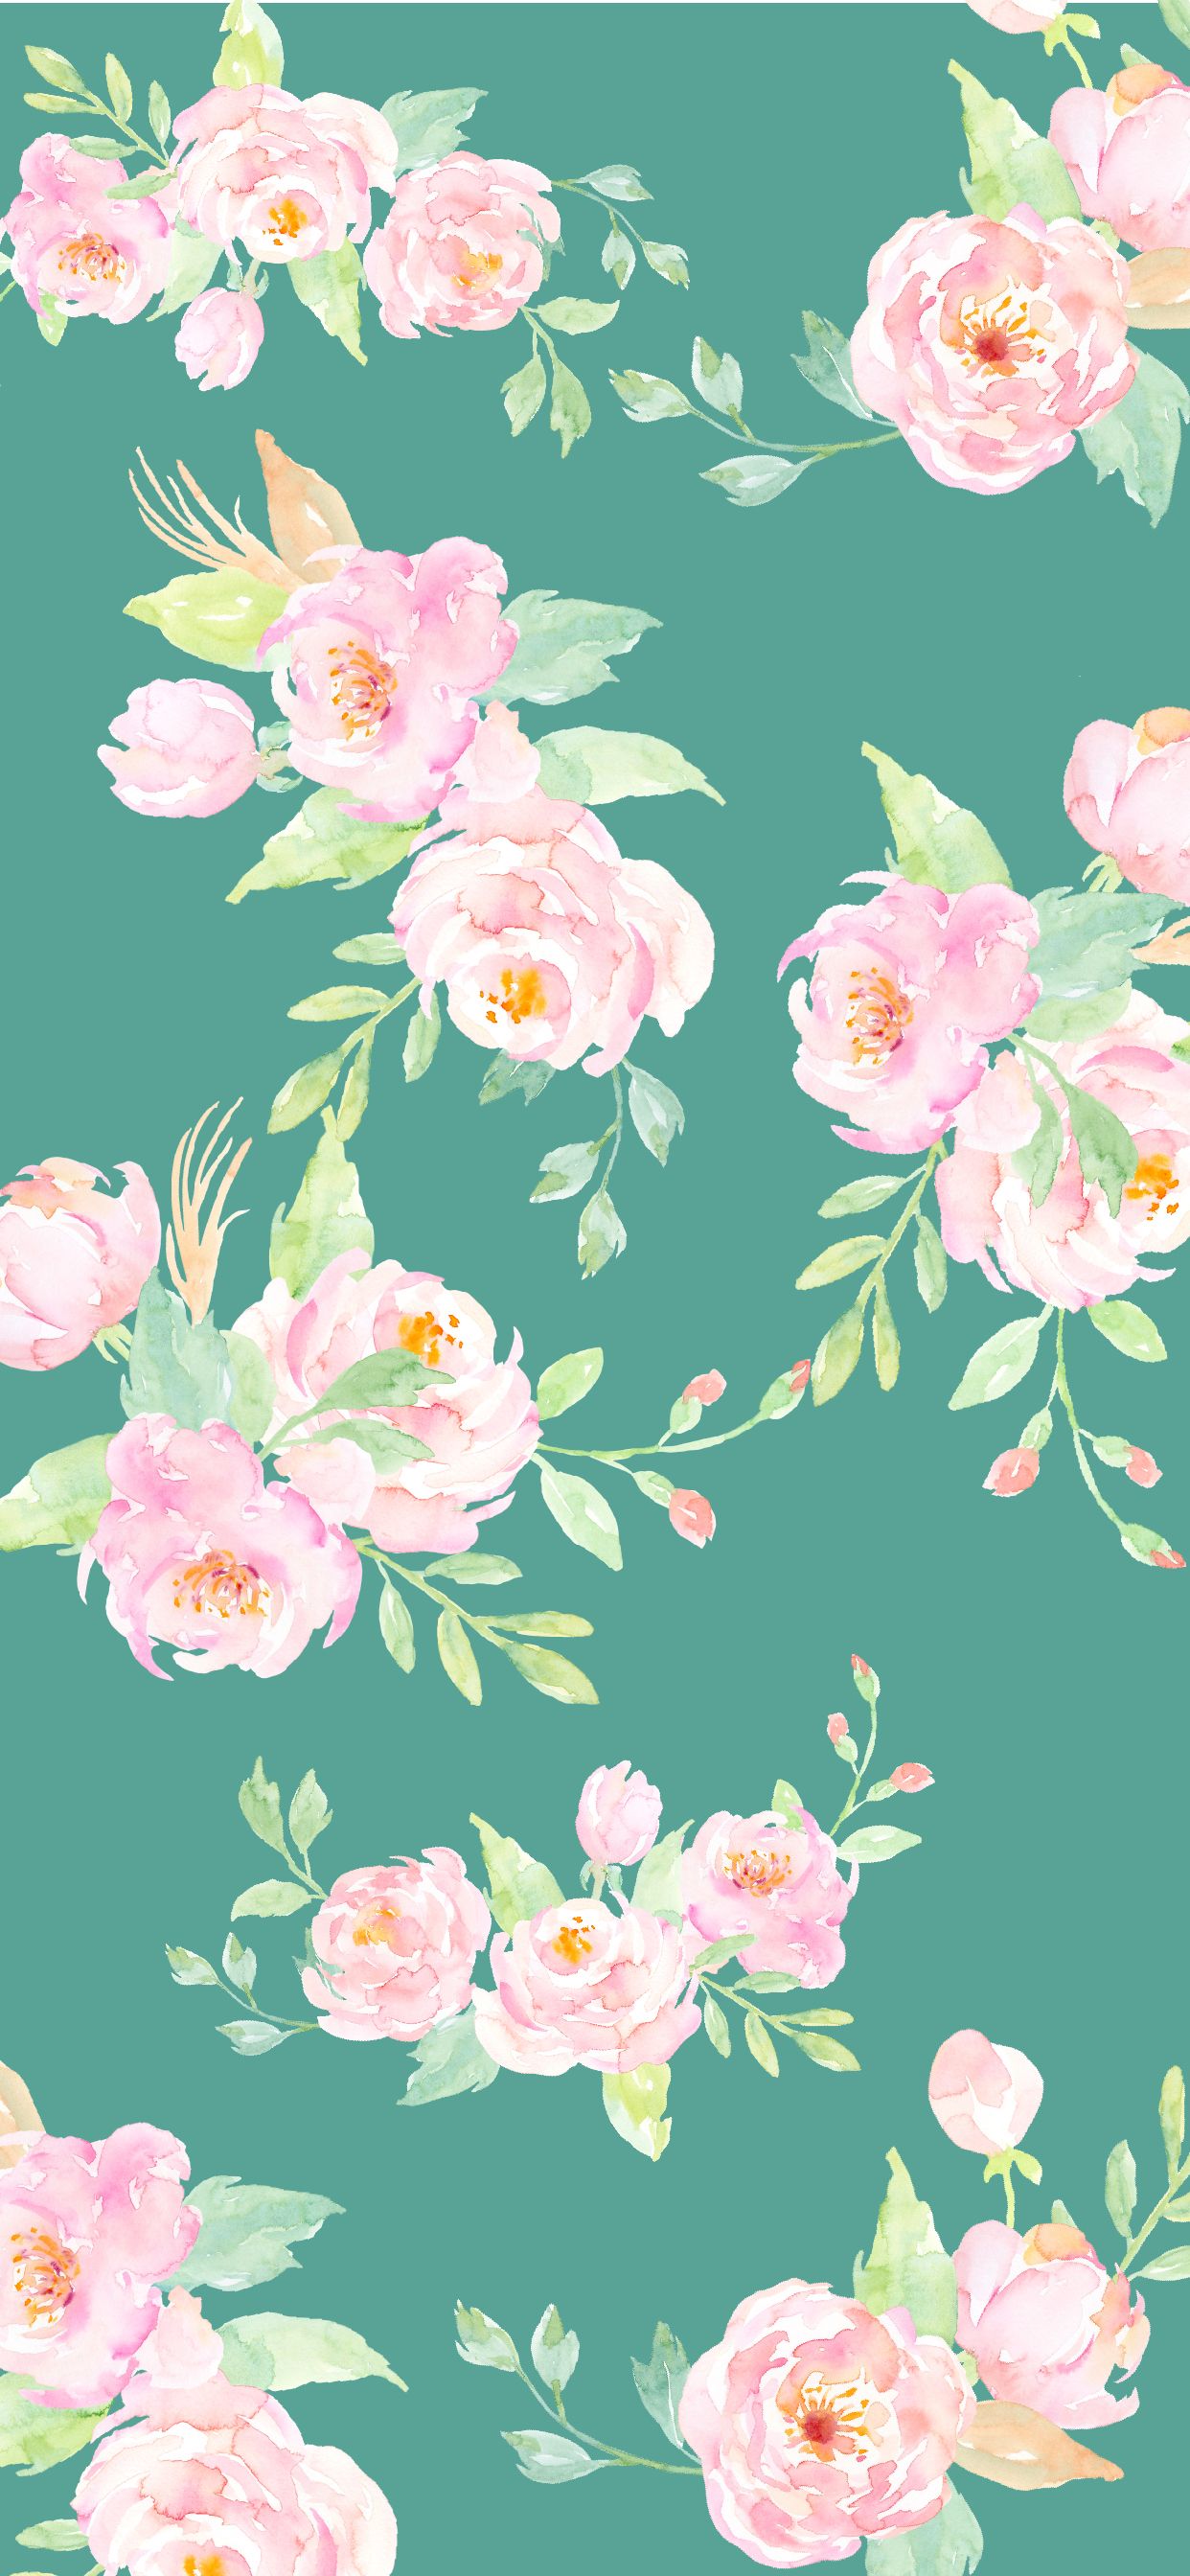 Spring Floral iPhone Wallpaper. Ginger and Ivory